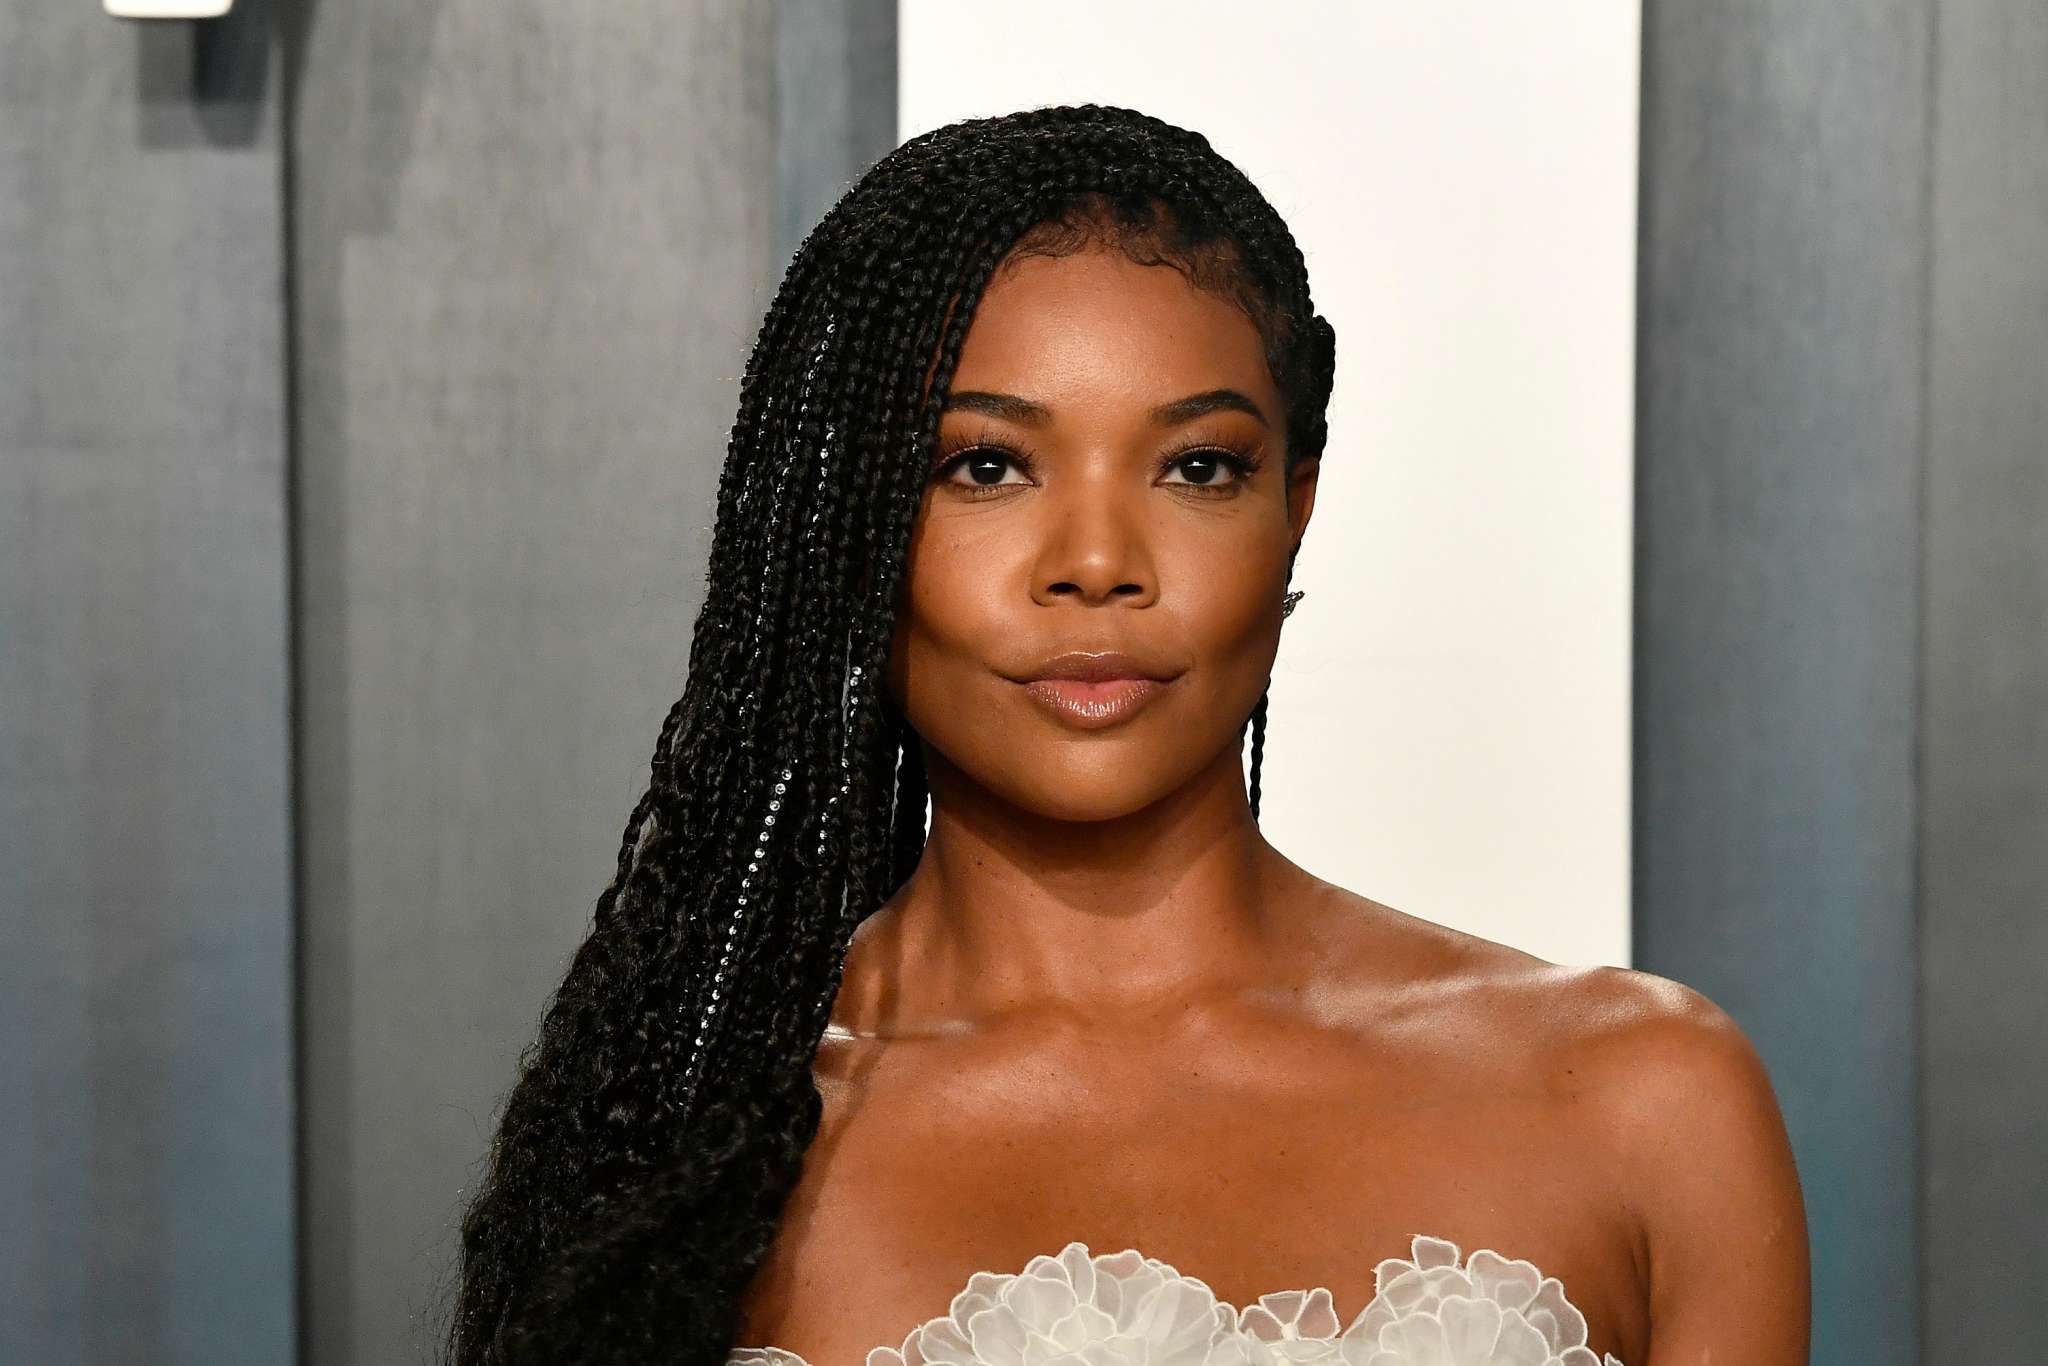 gabrielle-union-is-praising-joanna-noelle-levesque-see-the-clip-she-shared